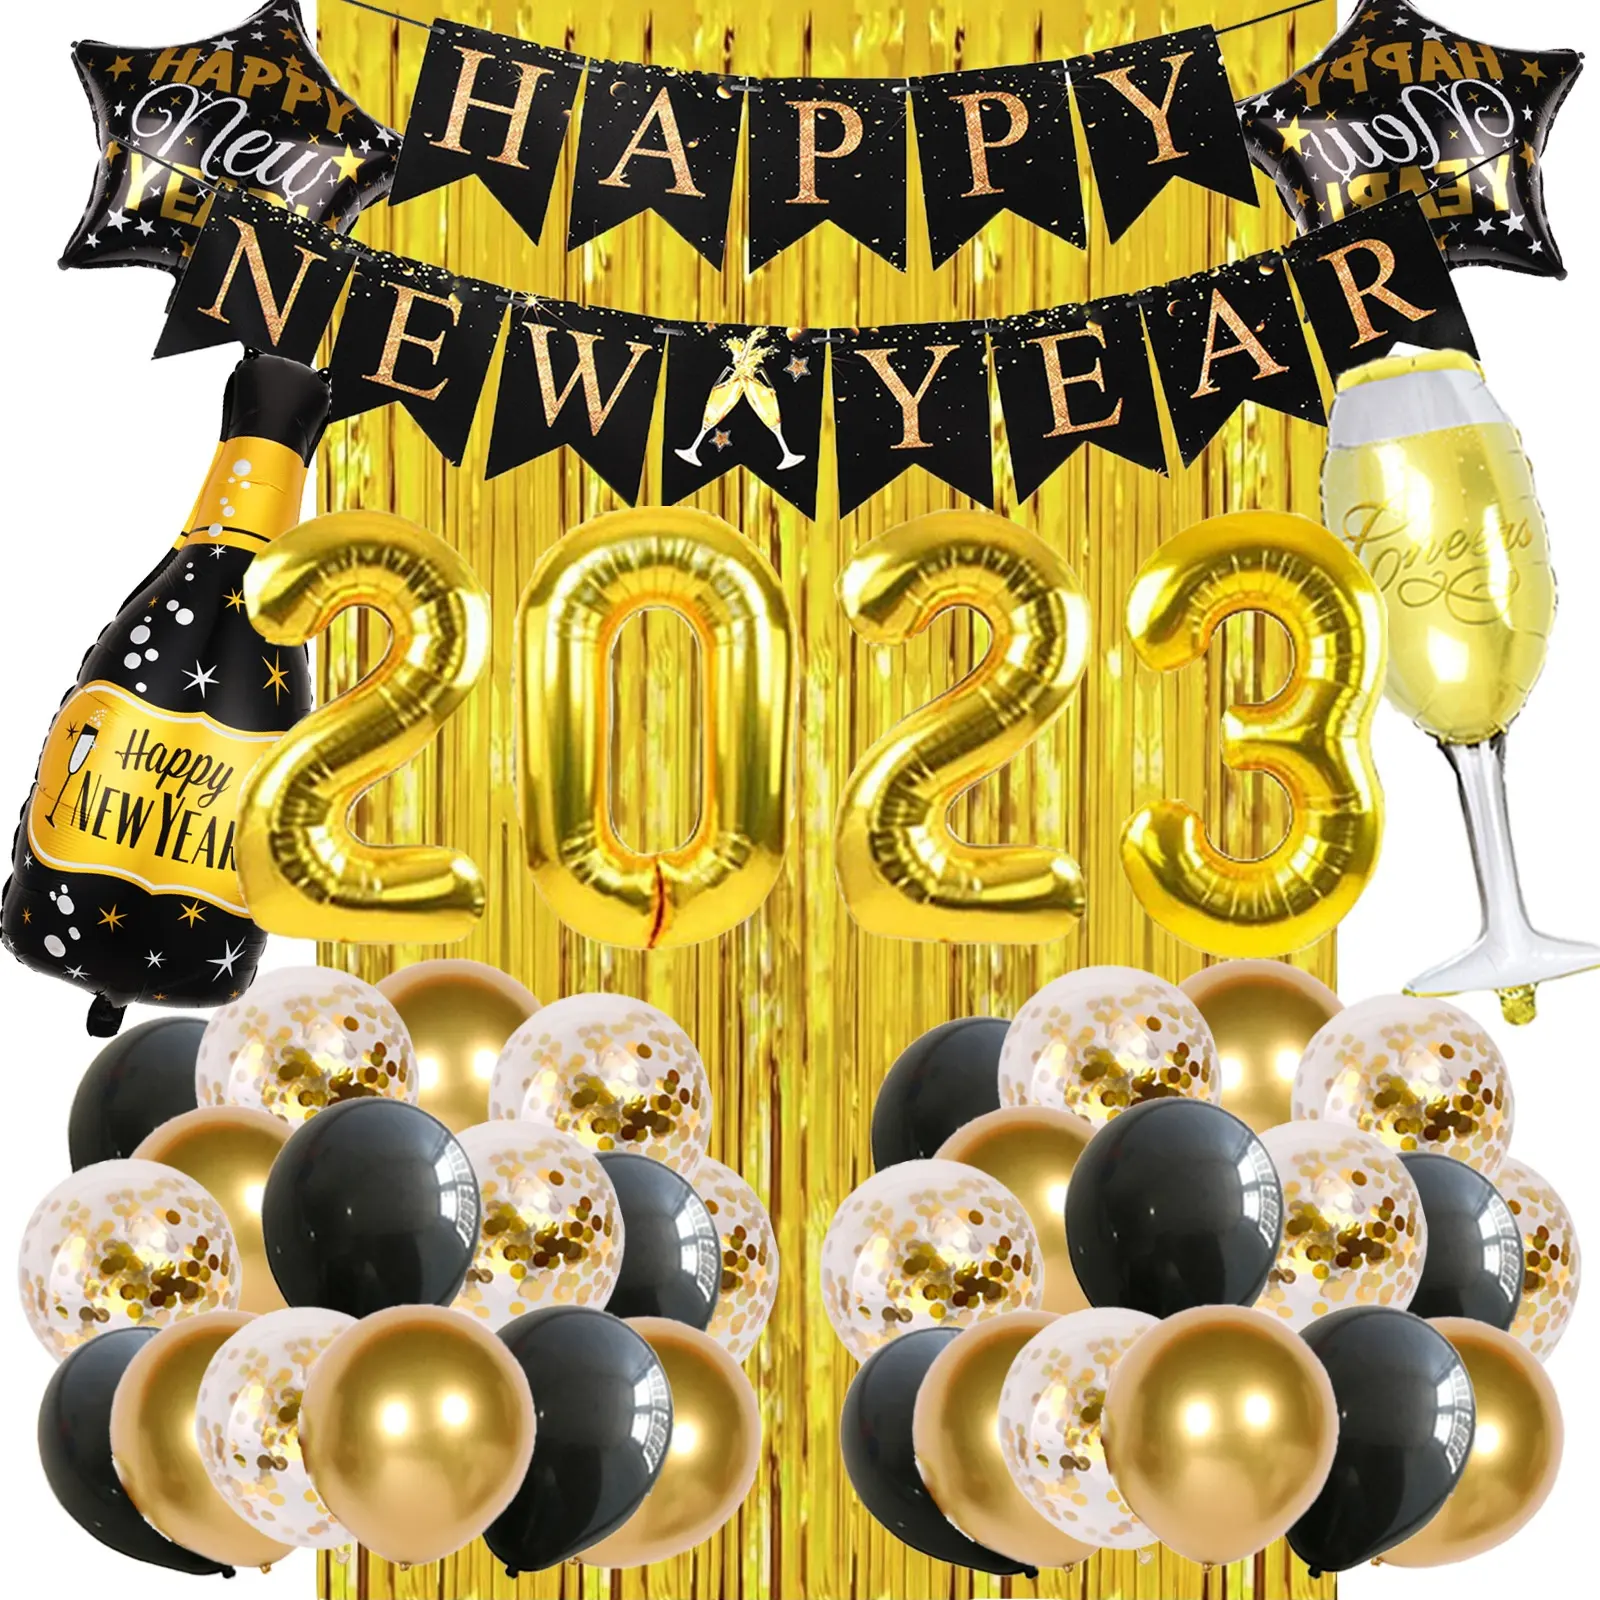 Happy New Year Eve 2023 New Arrivals Foil Balloon Kit with Banner Gold Curtain New Year Anniversary Party Supplies